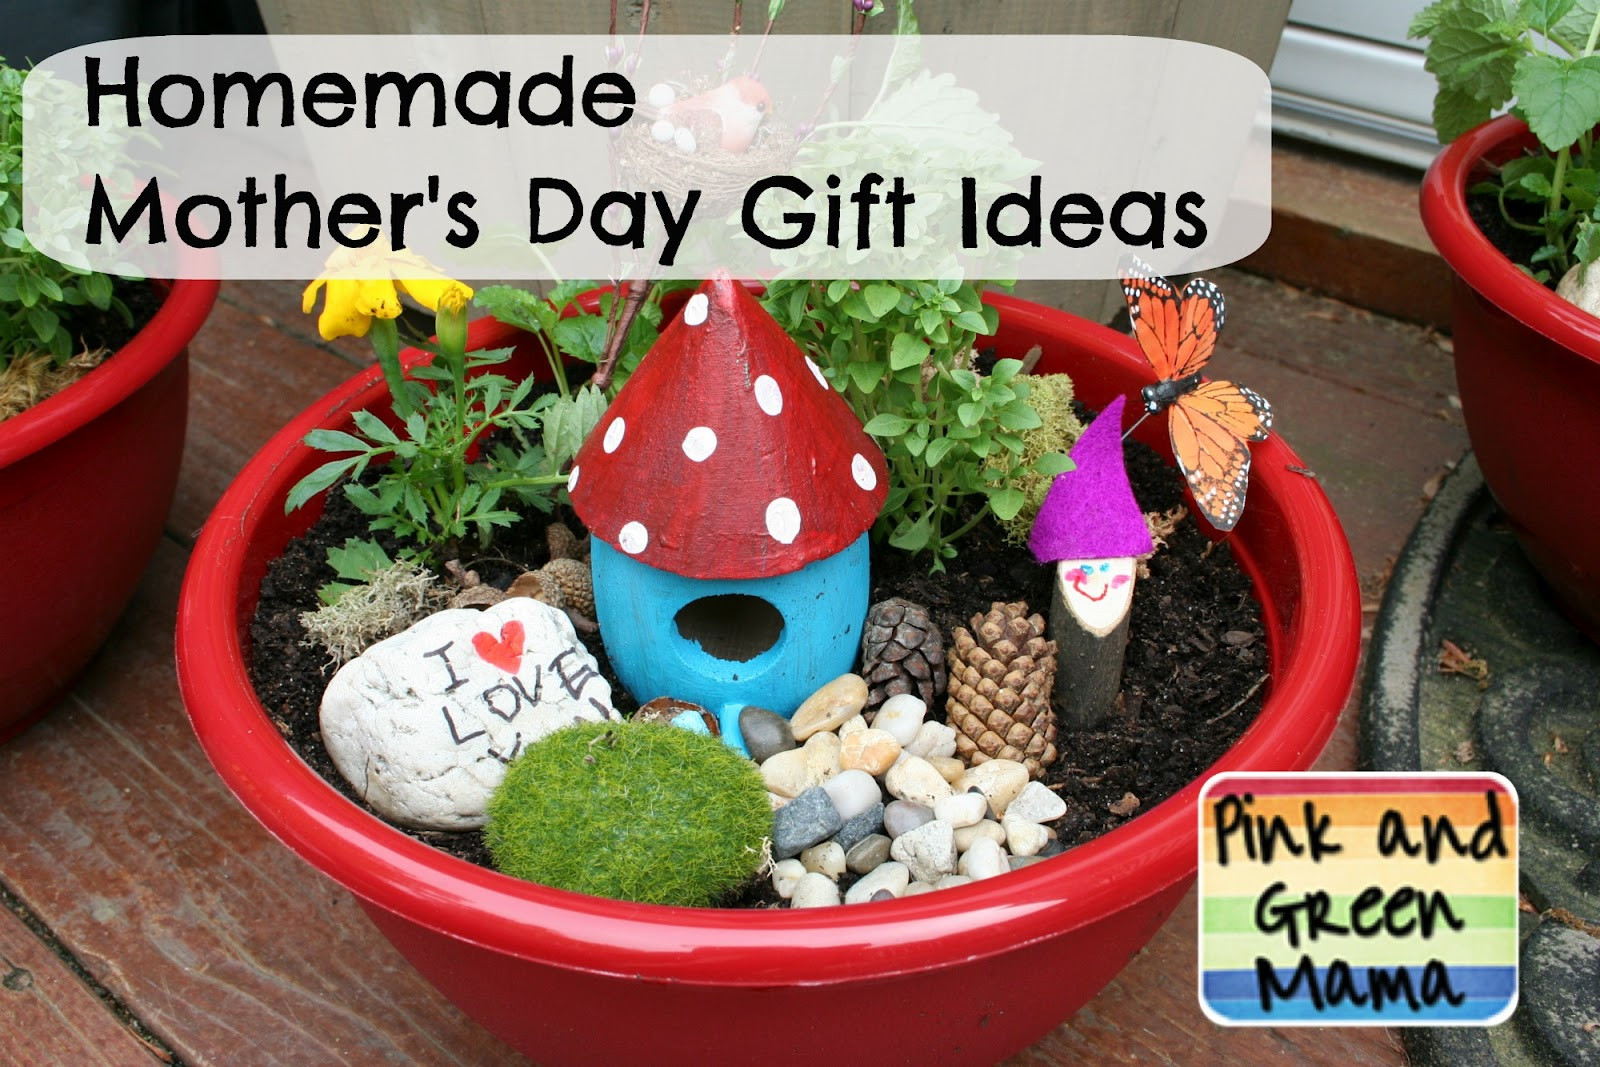 Mother Day Gift Ideas Diy
 Pink and Green Mama Homemade Mother s Day Gift Ideas